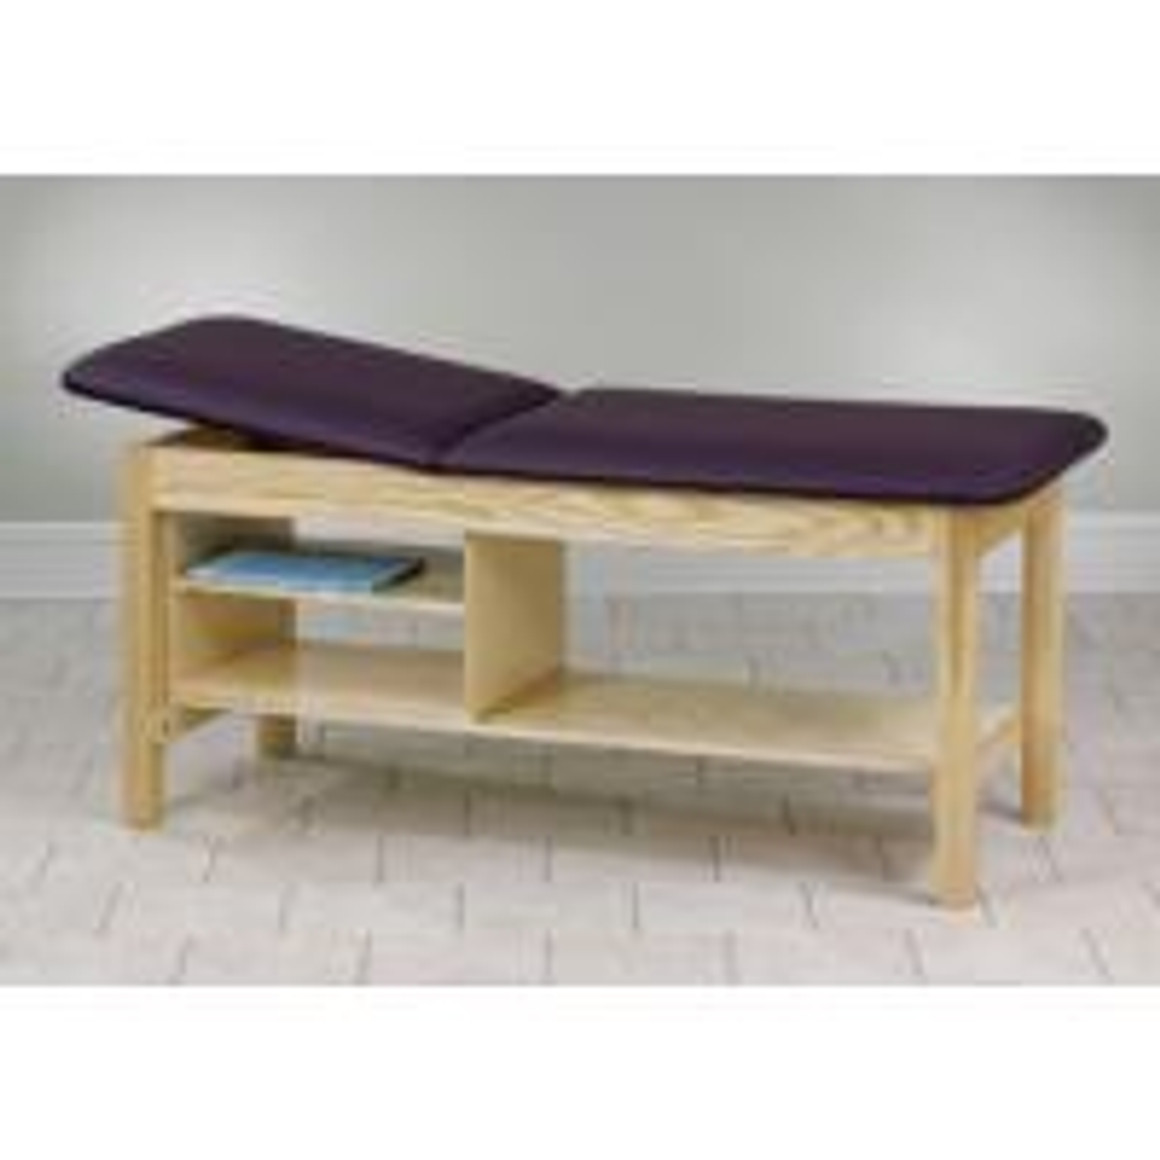 Clinton Classic Series Straight Line Treatment Table with Shelving Unit, 27" Wide, Allspice